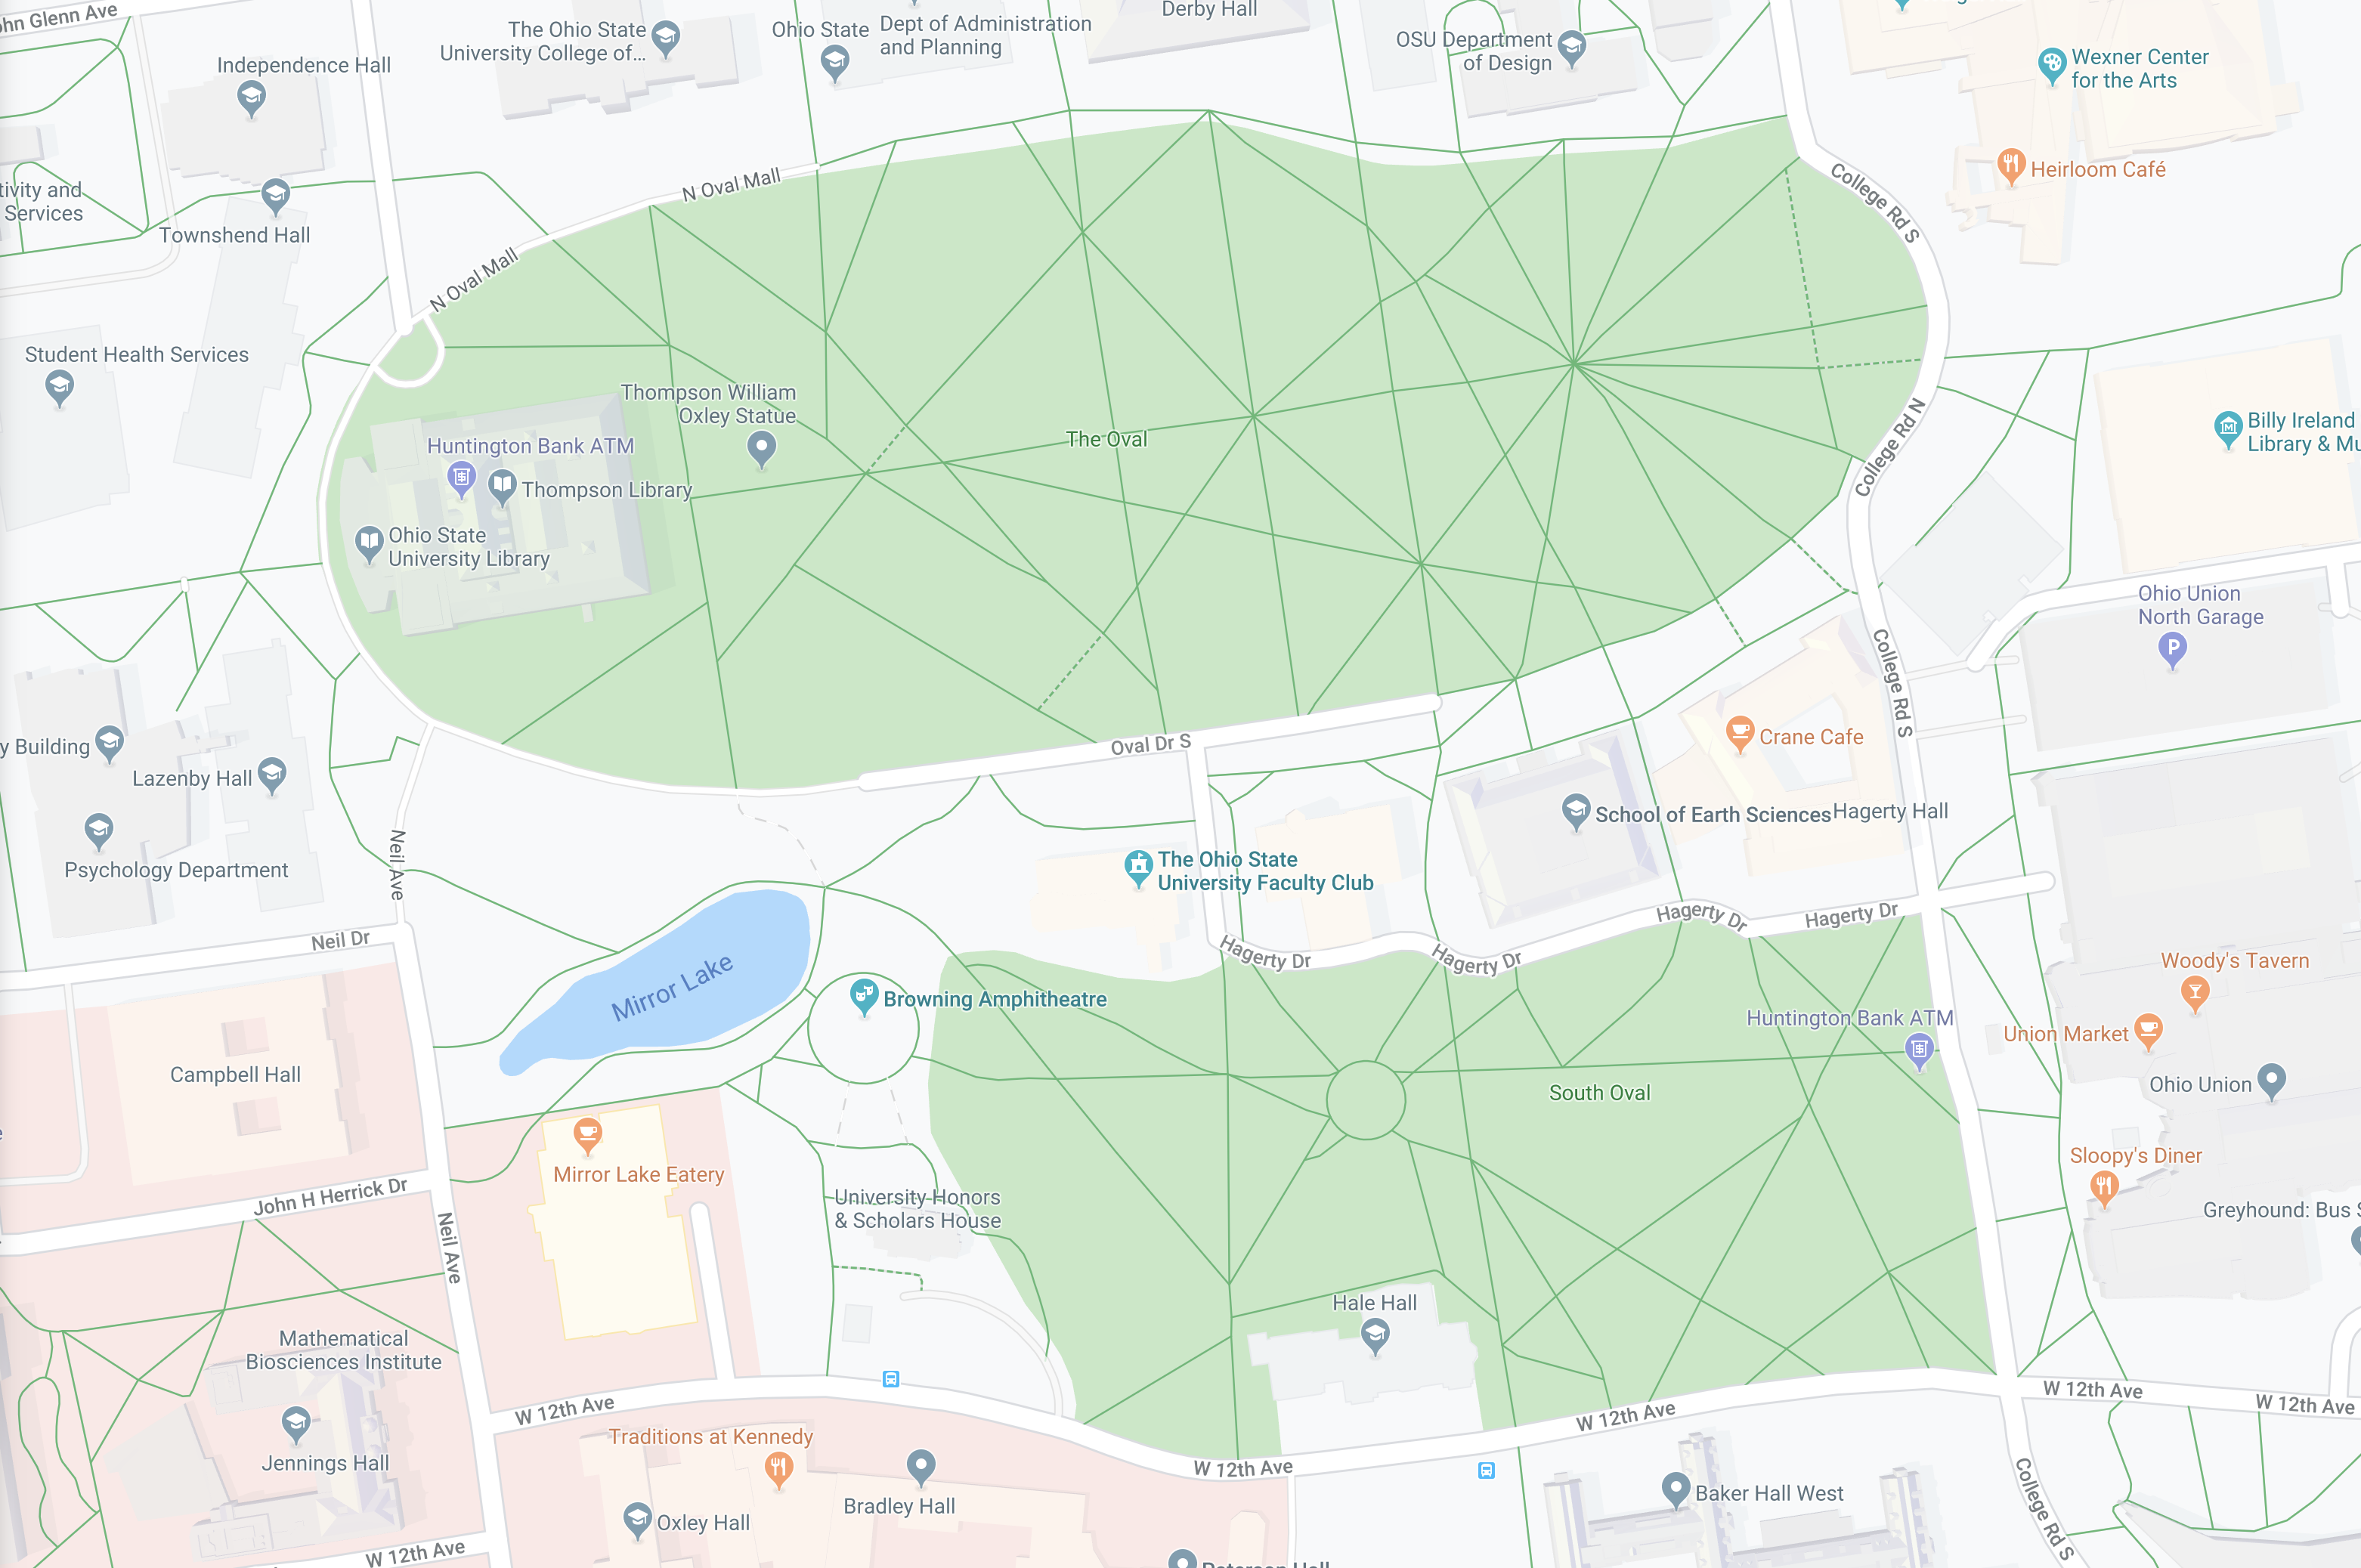 What the paths look like today, according to Google Maps